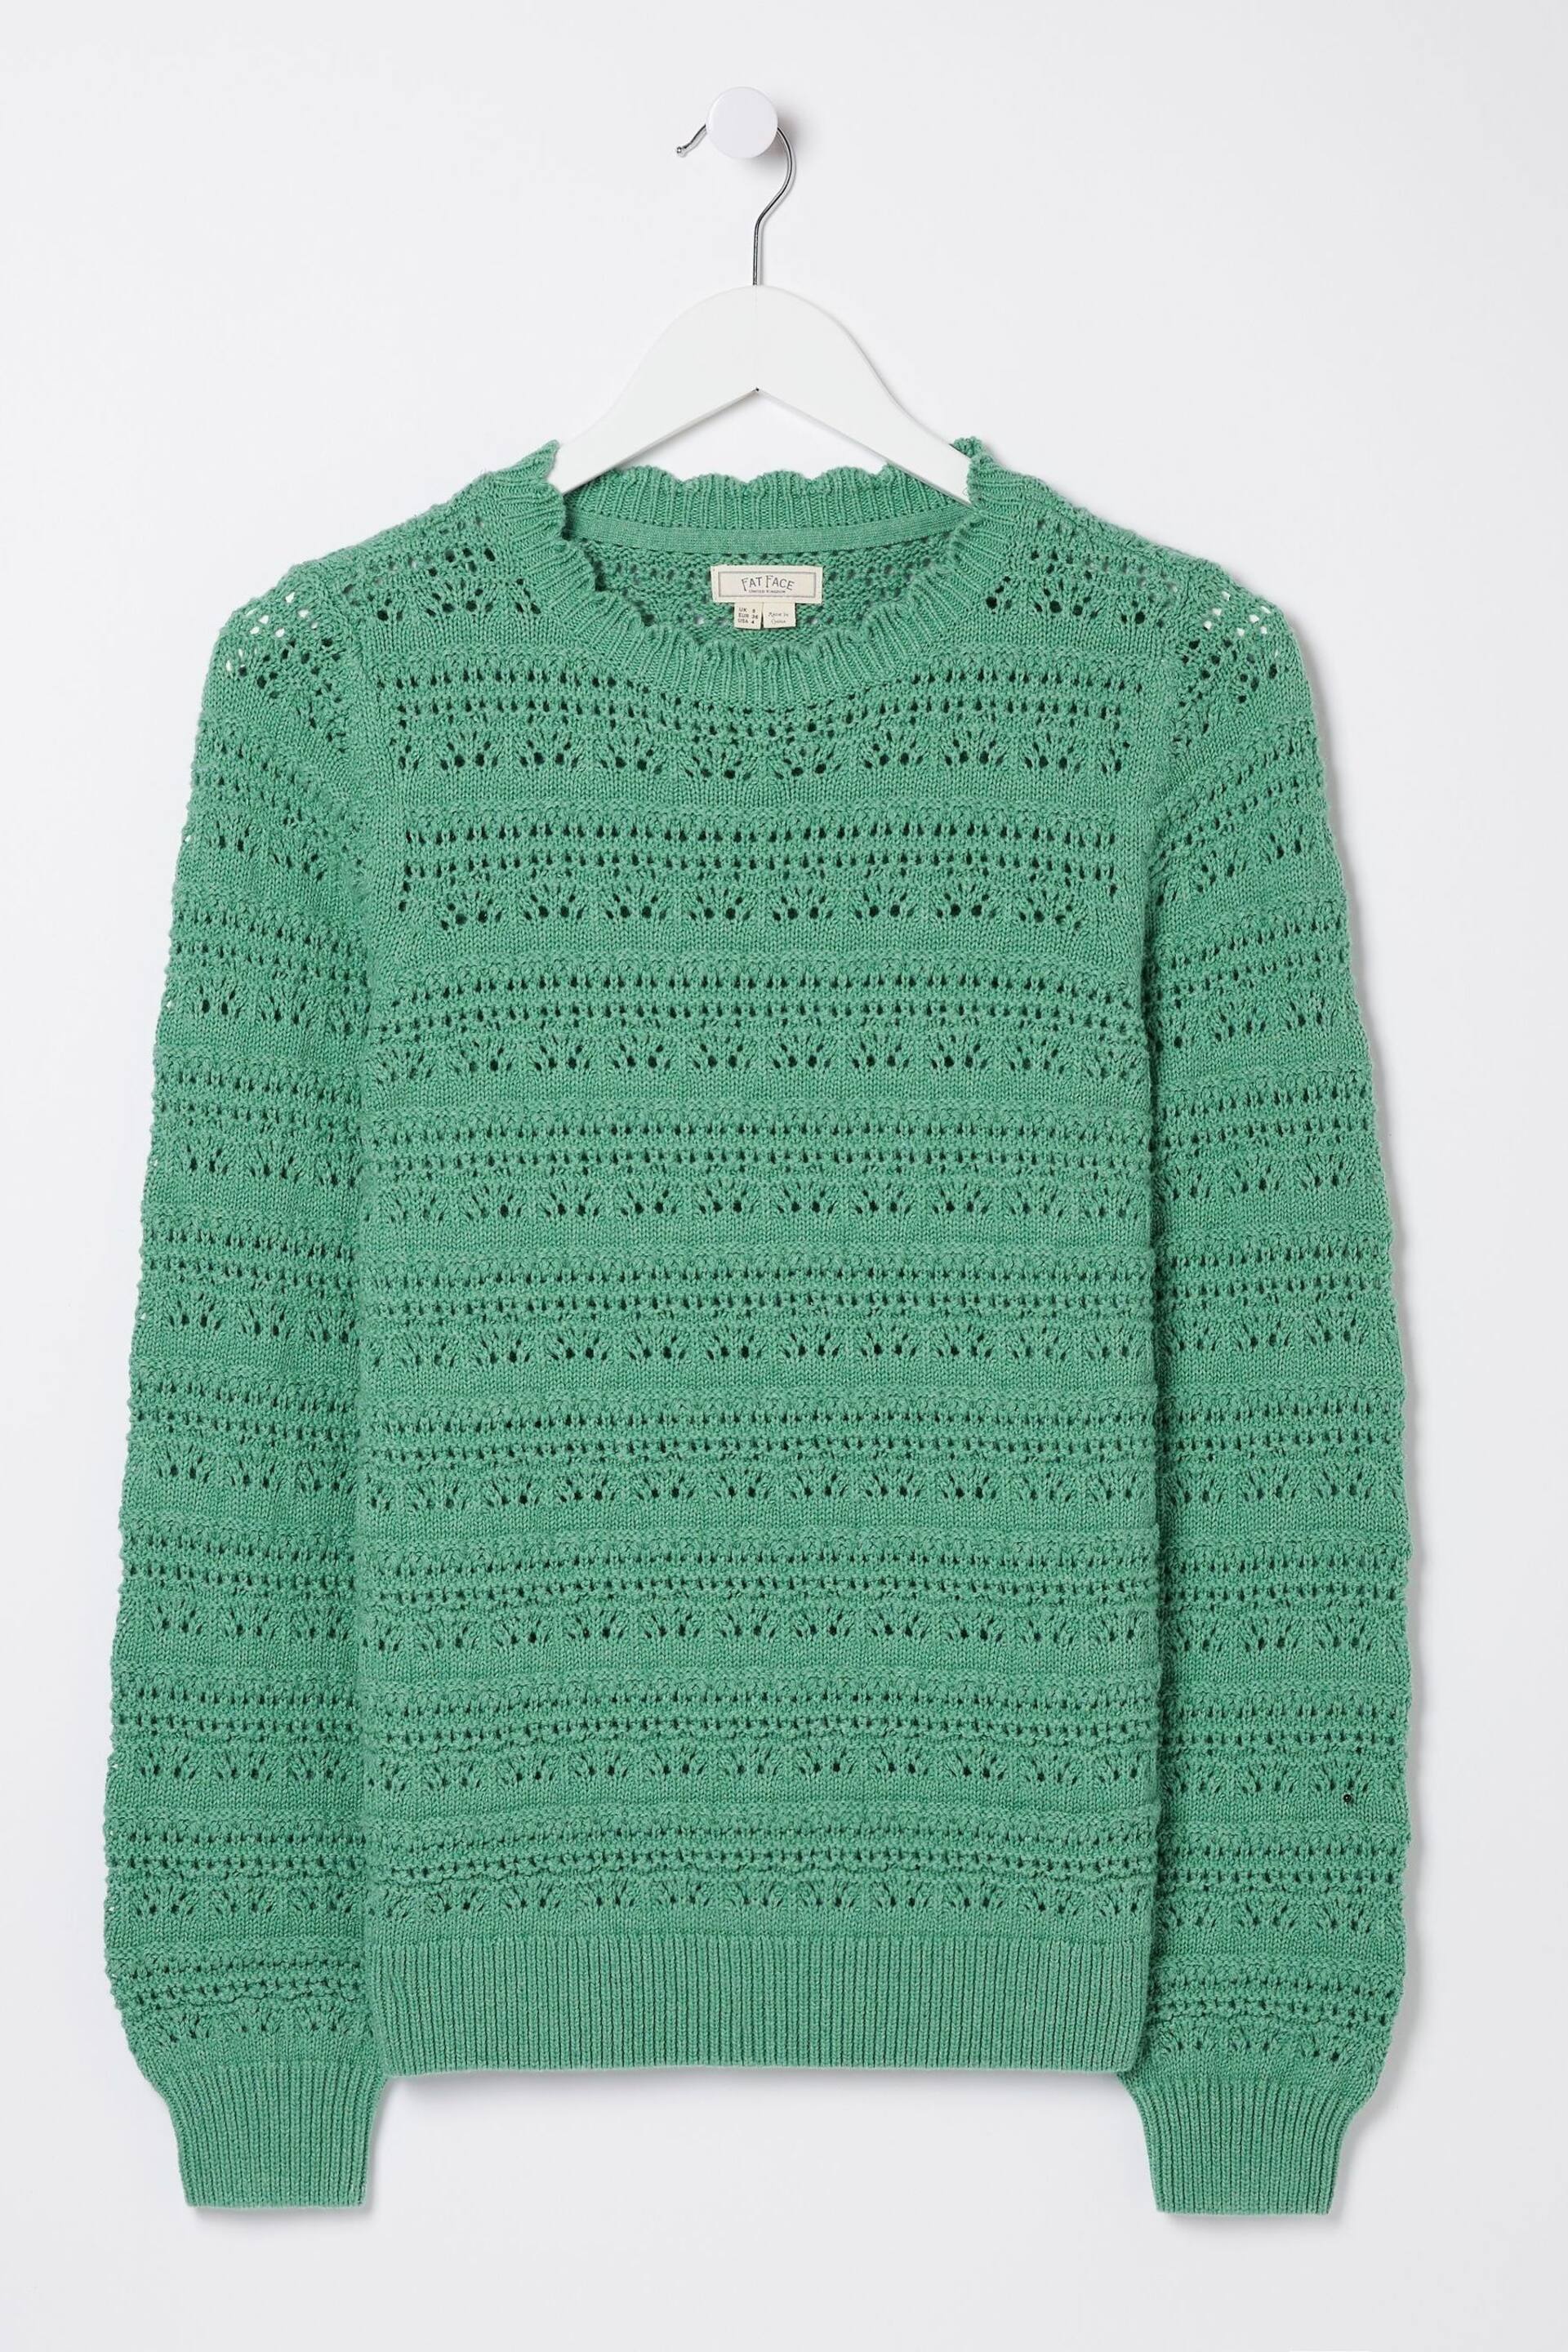 FatFace Green Adrinenna Crew Jumper - Image 5 of 5